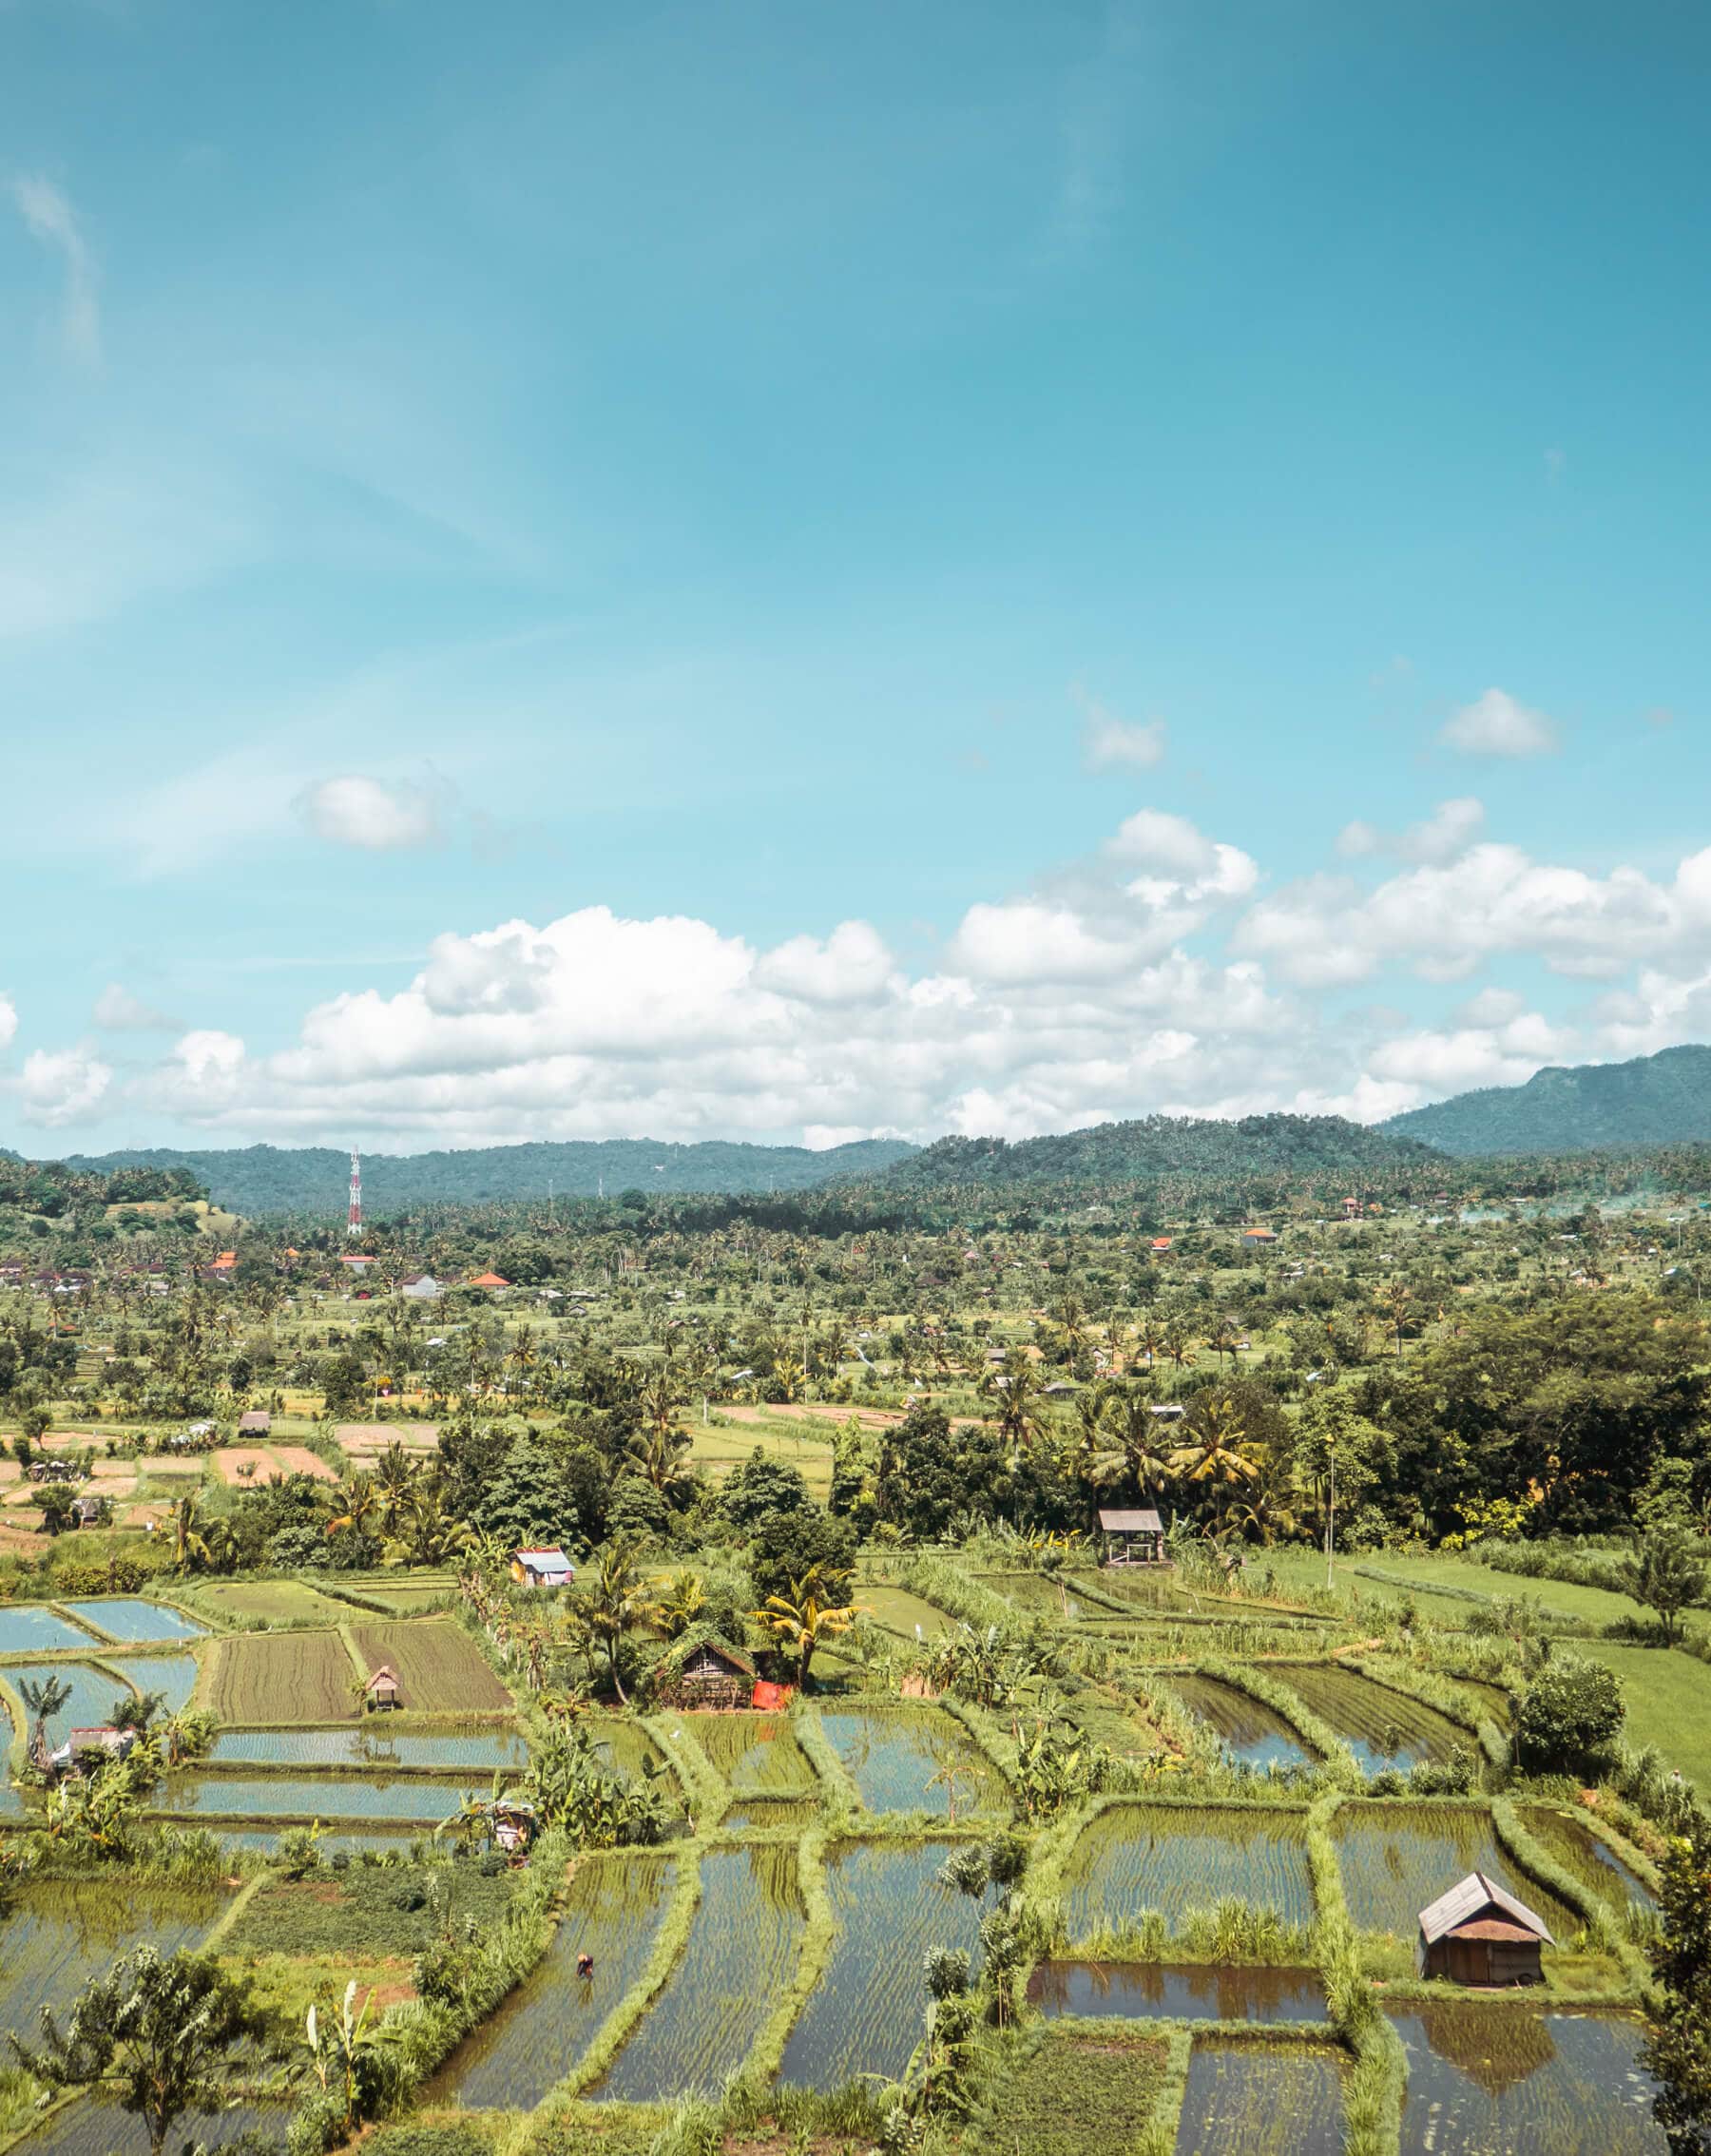 View of green rice fields with mountains in the background and a blue sky from our hotel in beautiful East Bali.